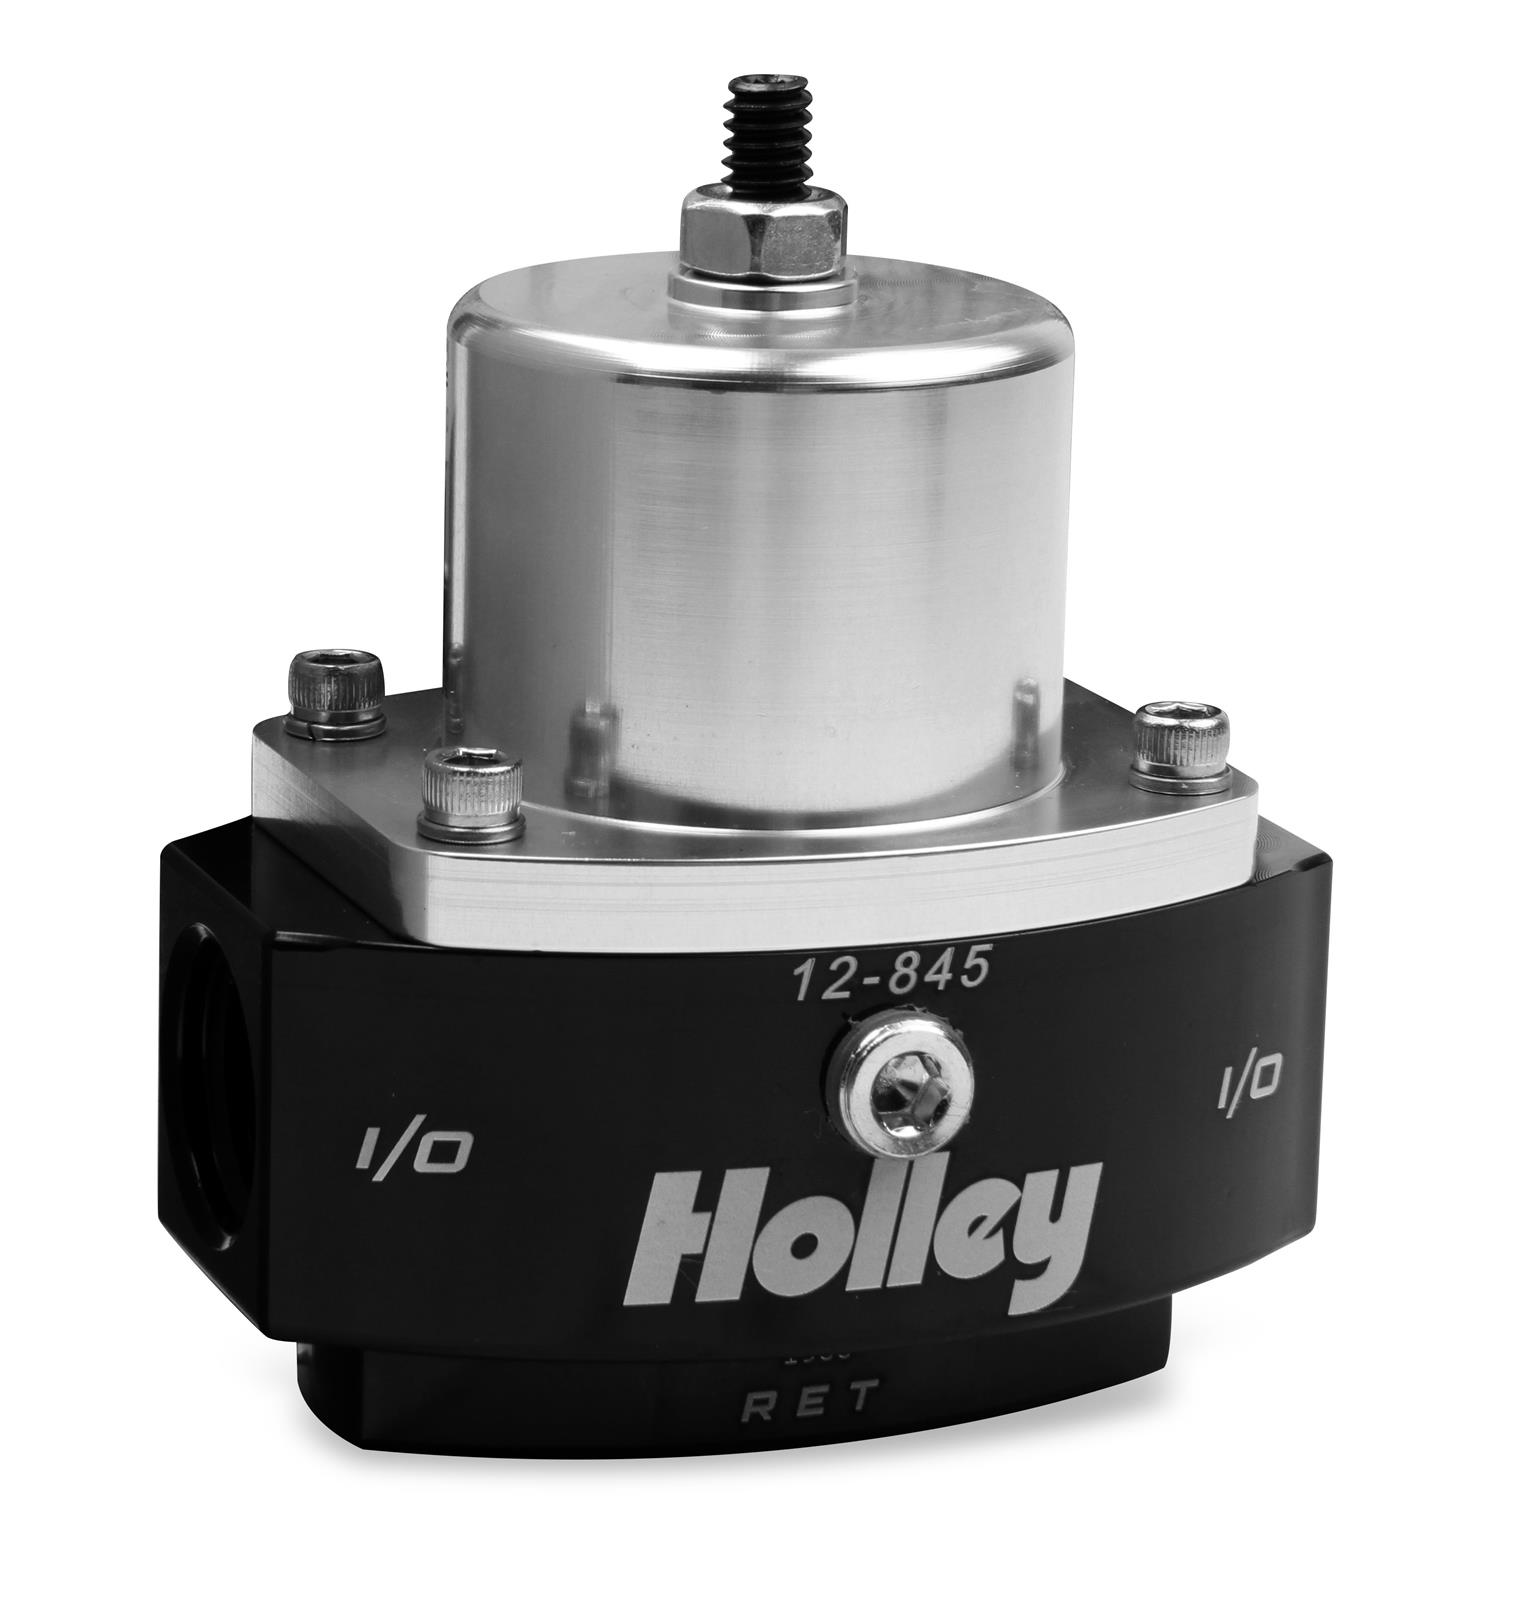 boost referenced 350 holley